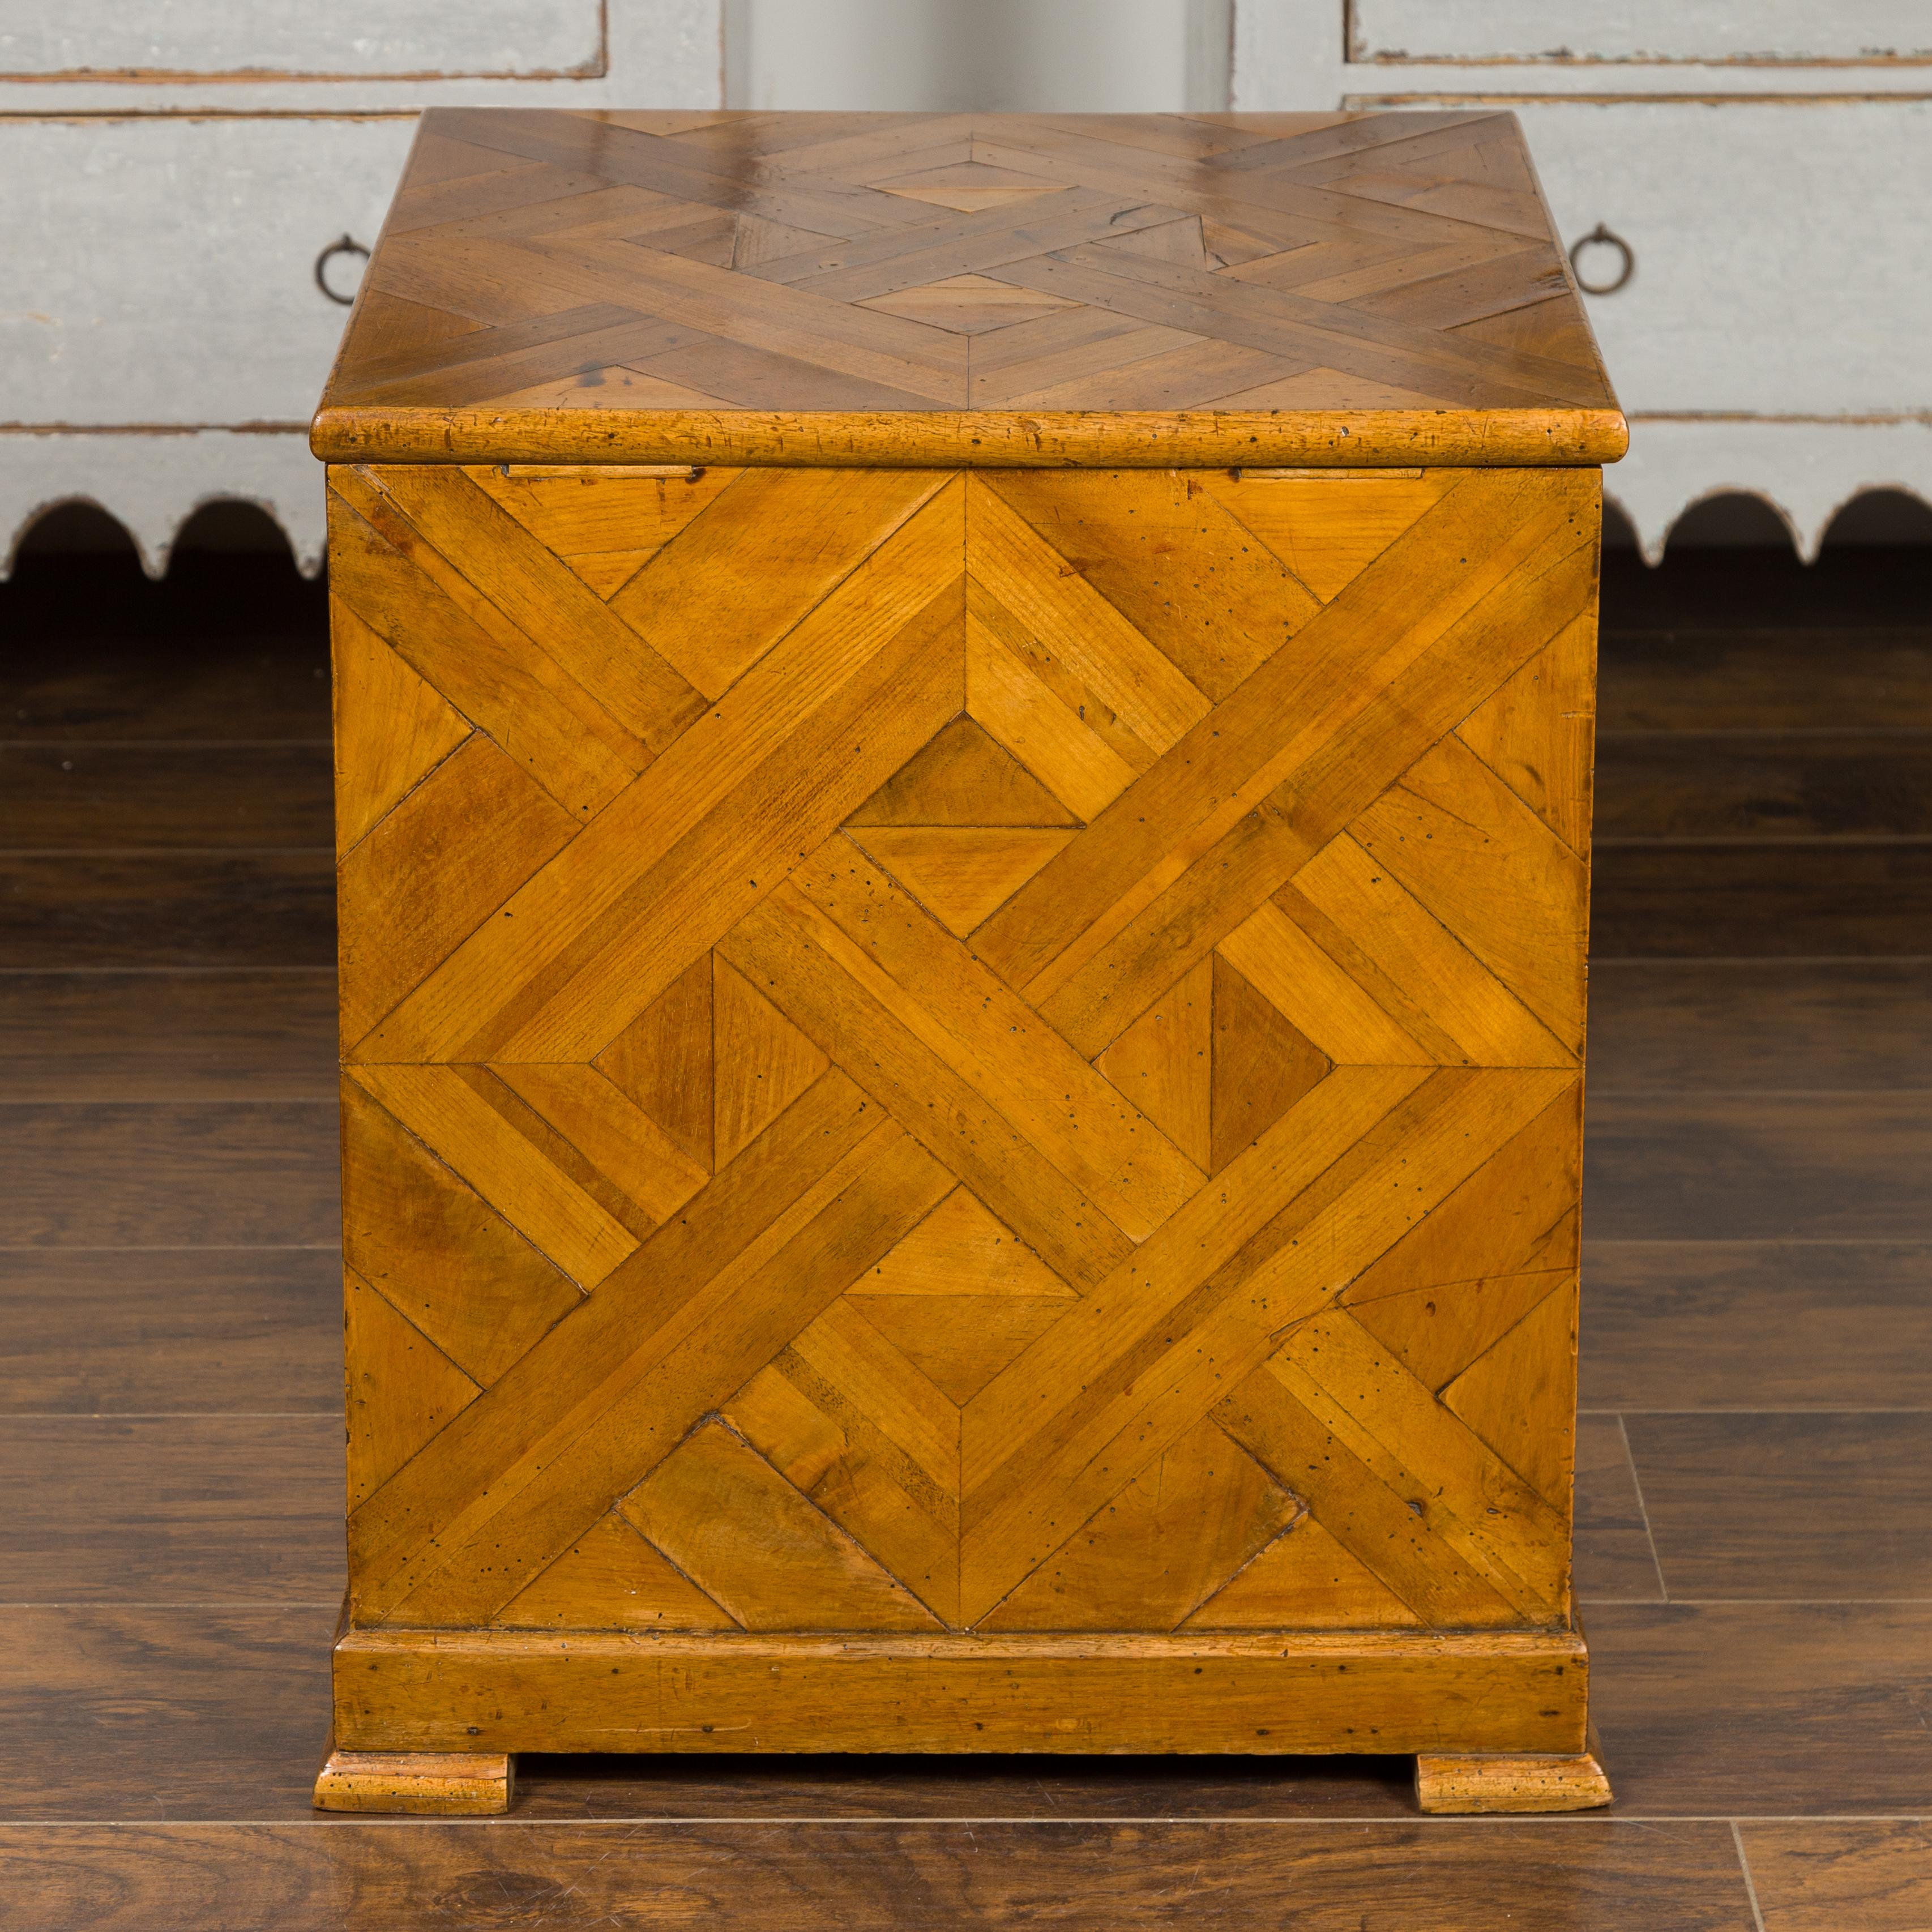 A large Italian walnut box from the early 19th century, with parquetry decor and wicker basket. Born in Italy during the first quarter of the 19th century, this box captures our attention with its large proportions and inlaid parquetry decor. The